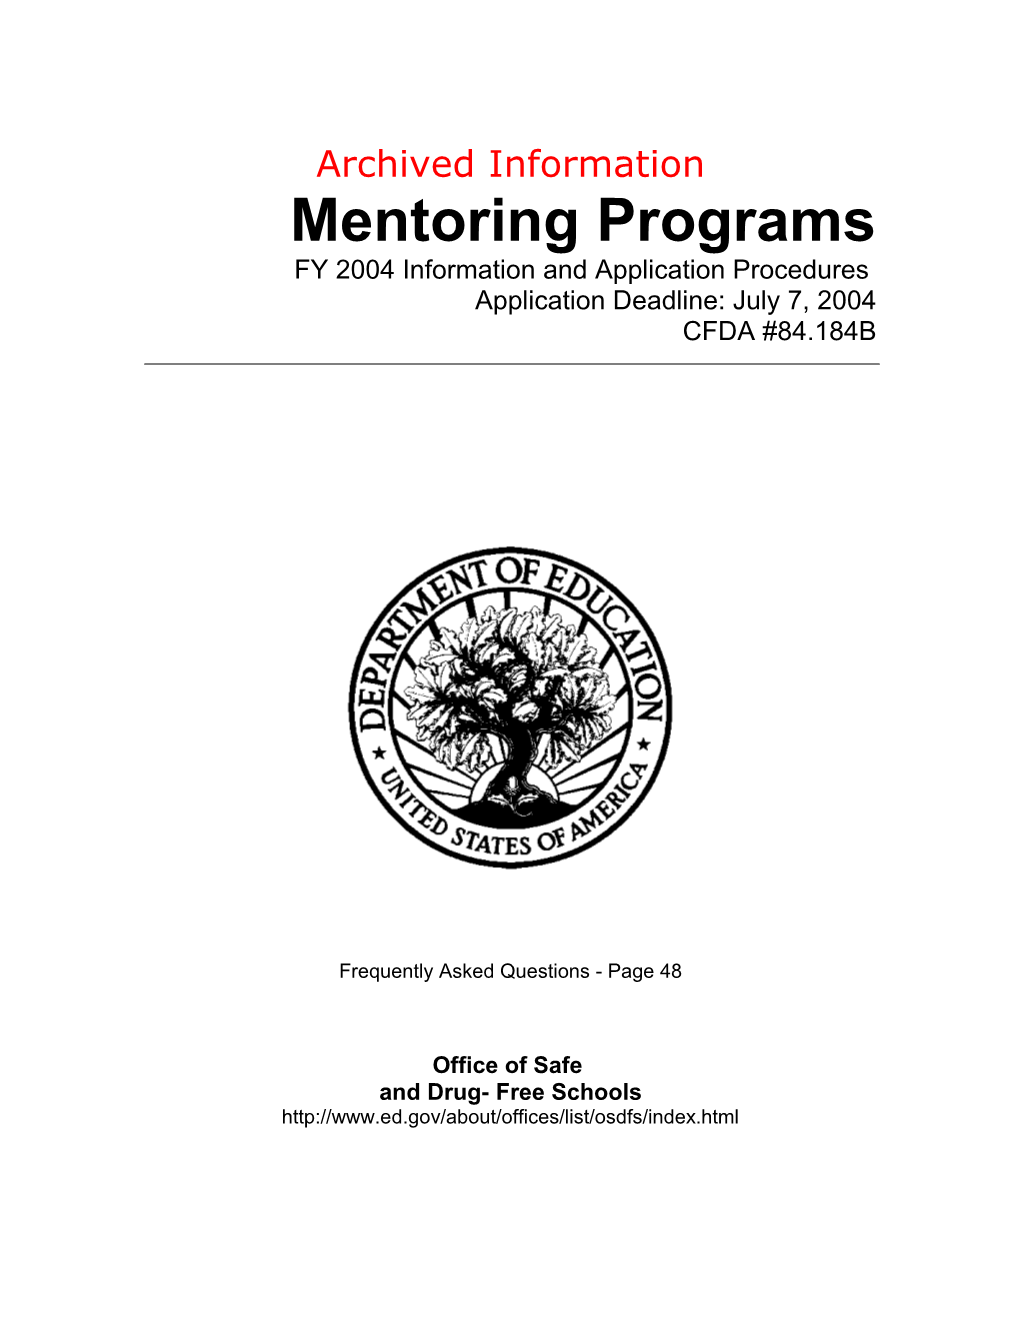 Archived: FY 2004 Mentoring Programs Application Package (MSWORD)